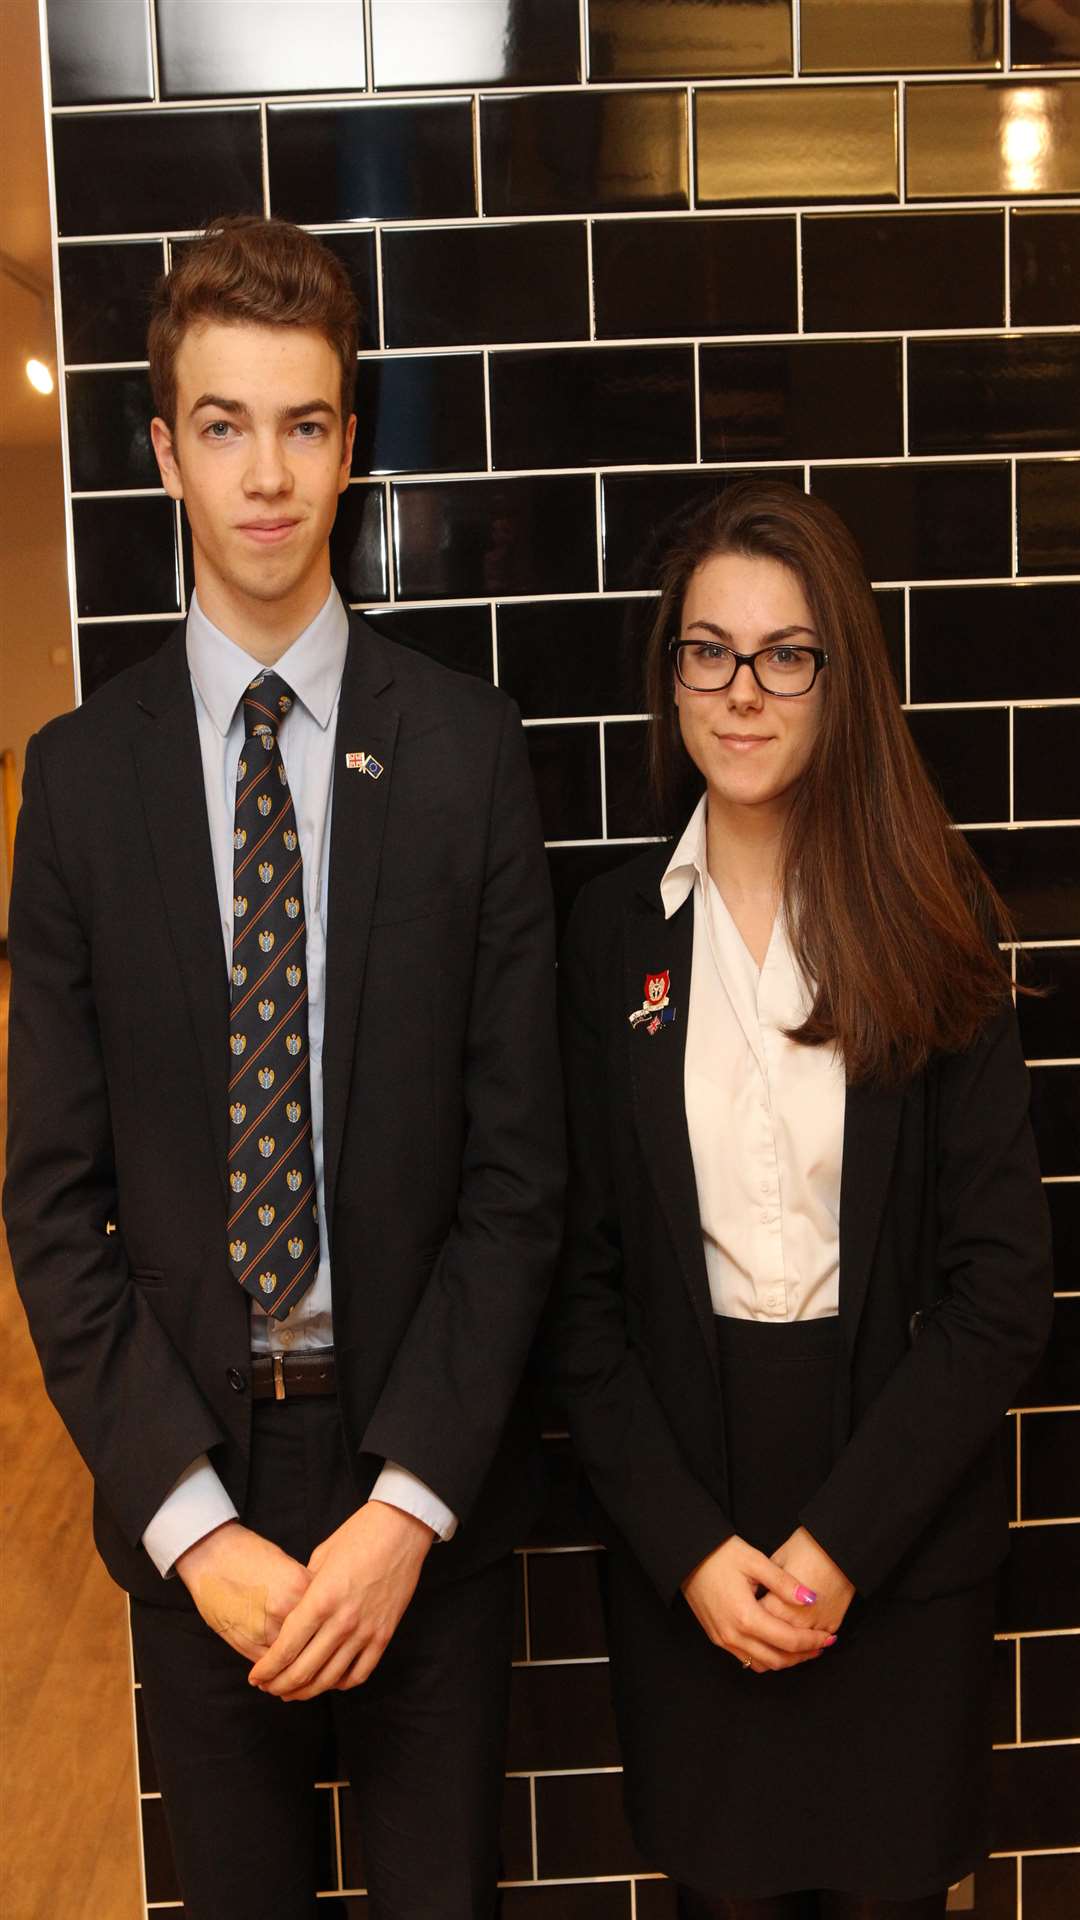 Jamie and Iulia worked together to represent Sweden in a series of debates.